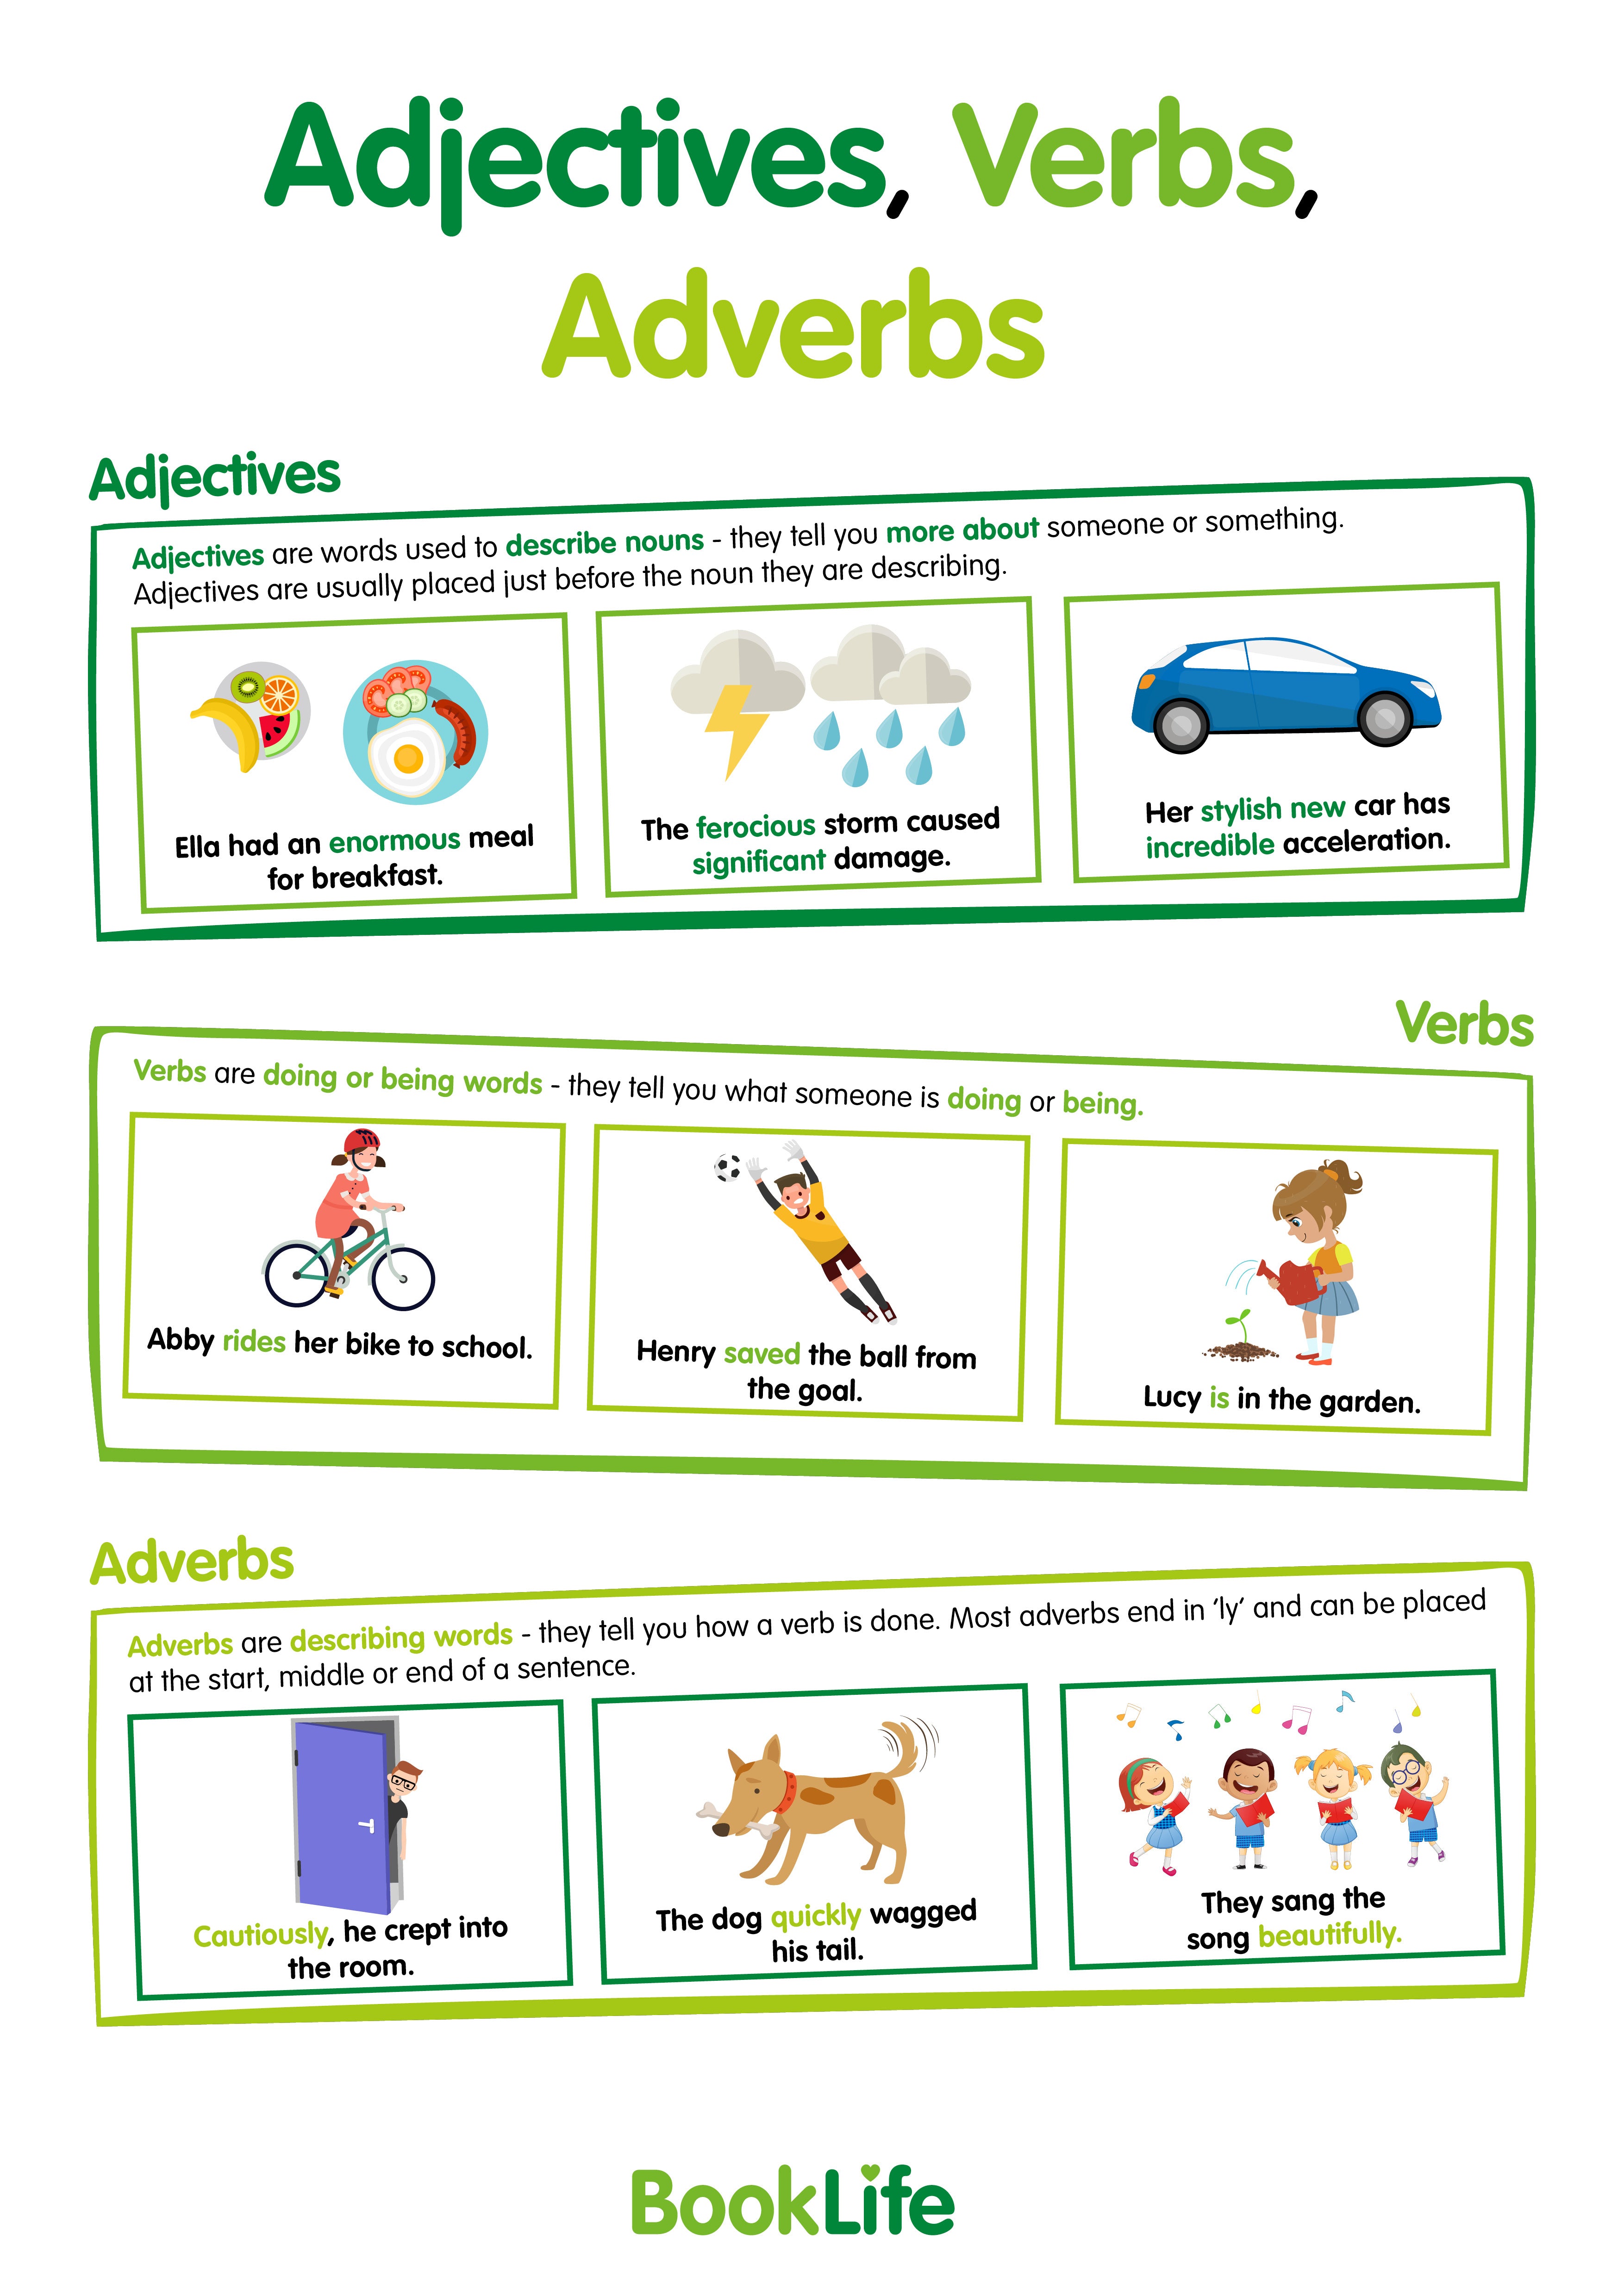 Free Adjectives, Verbs, Adverbs Poster by BookLife